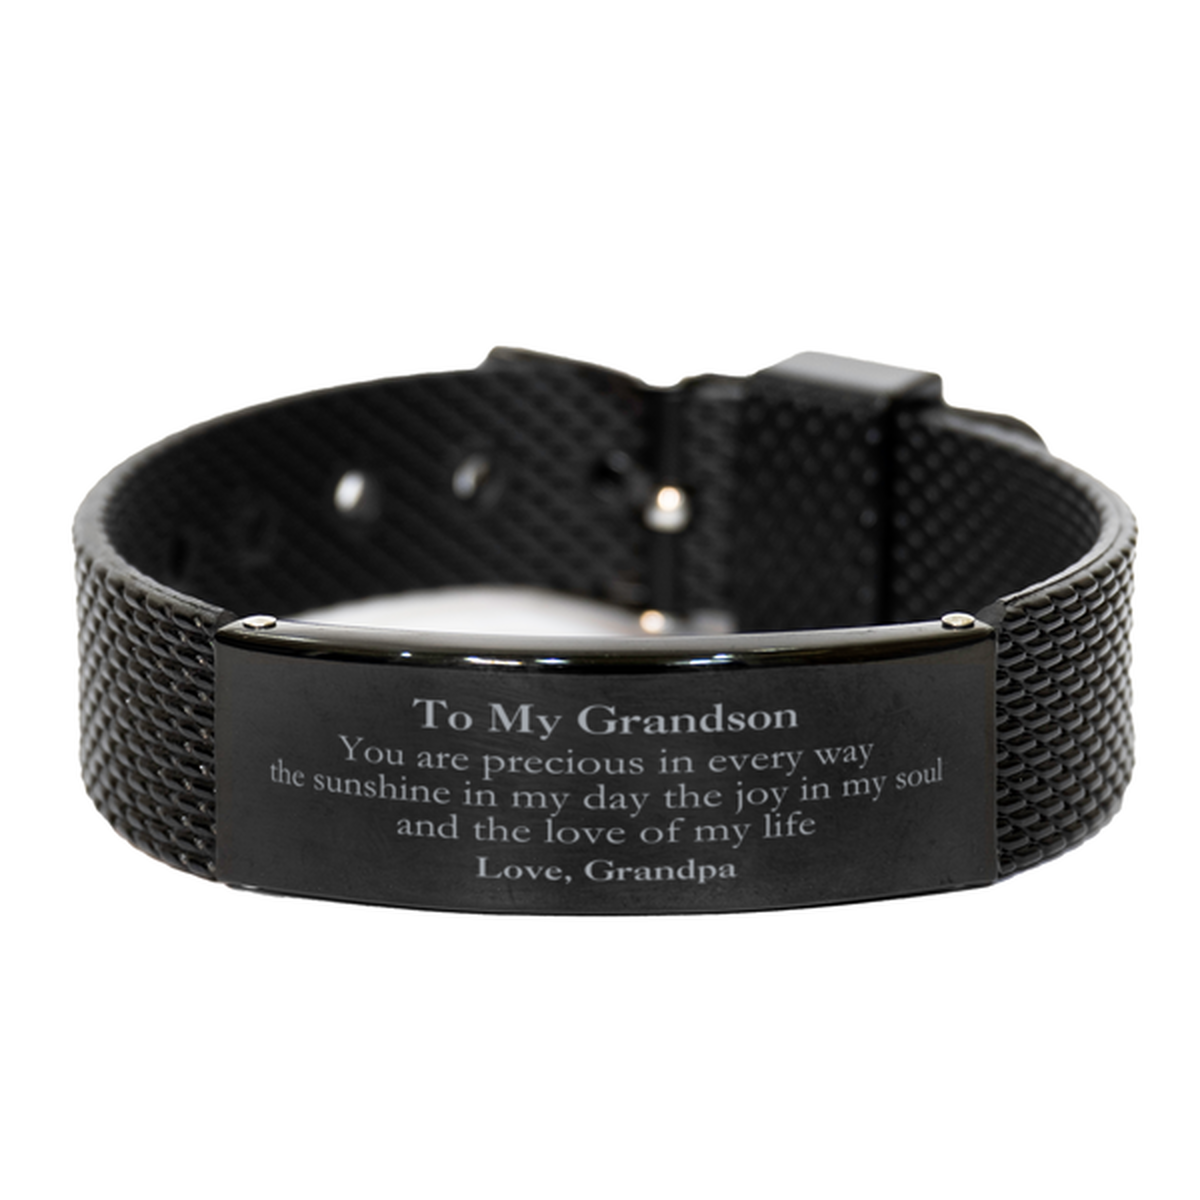 Graduation Gifts for Grandson Black Shark Mesh Bracelet Present from Grandpa, Christmas Grandson Birthday Gifts Grandson You are precious in every way the sunshine in my day. Love, Grandpa